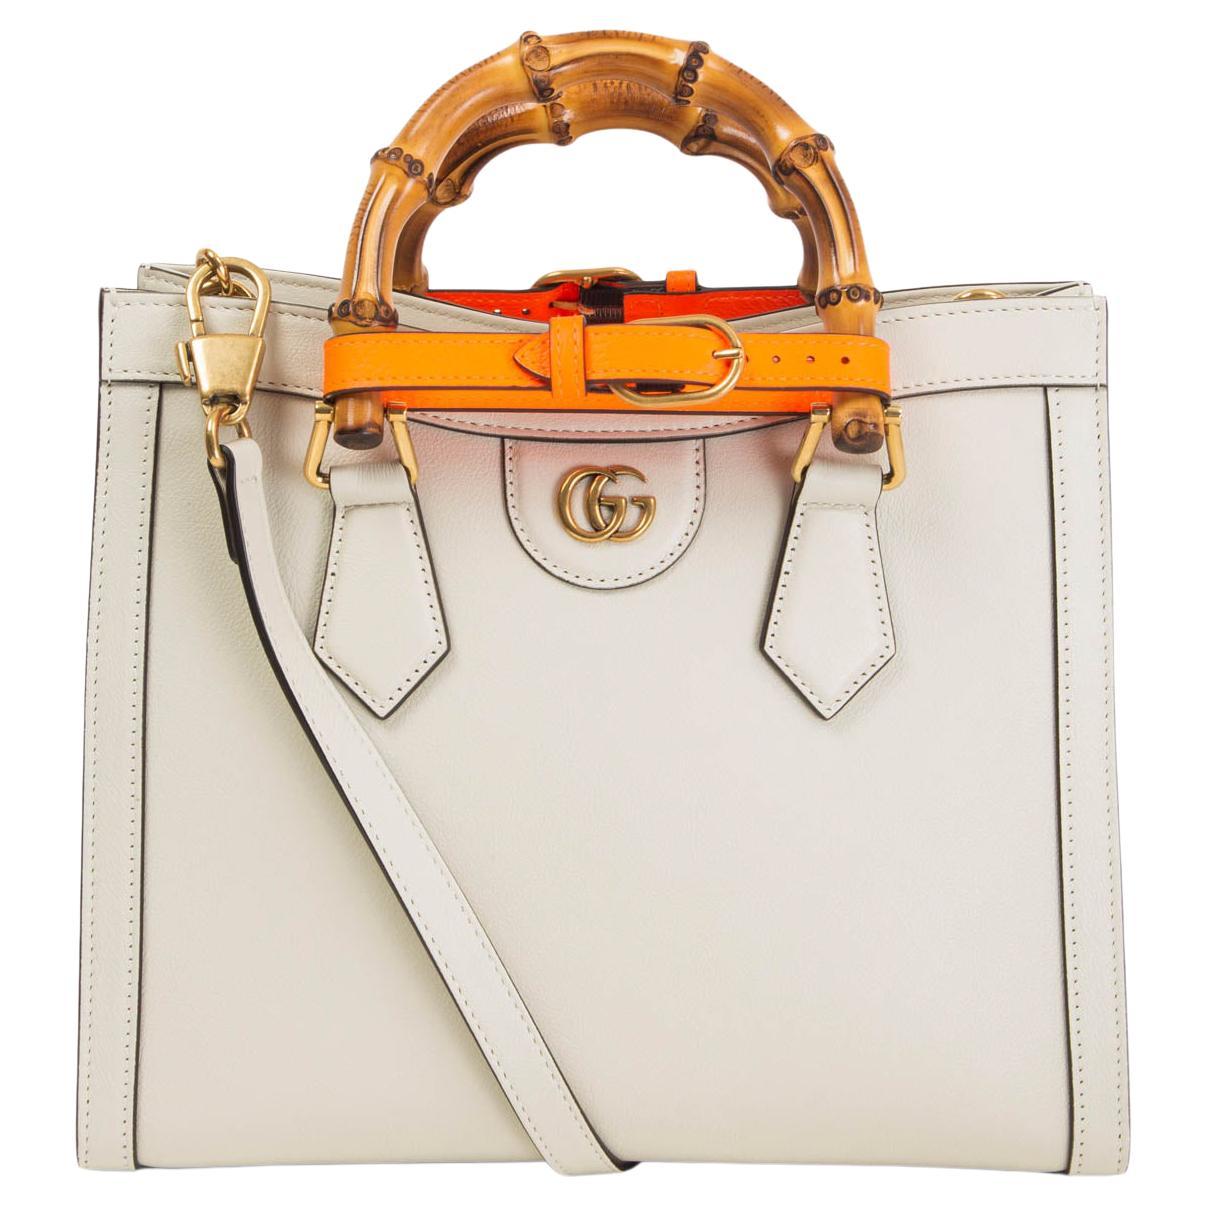 GUCCI off-white leather DIANA SMALL TOTE Bag